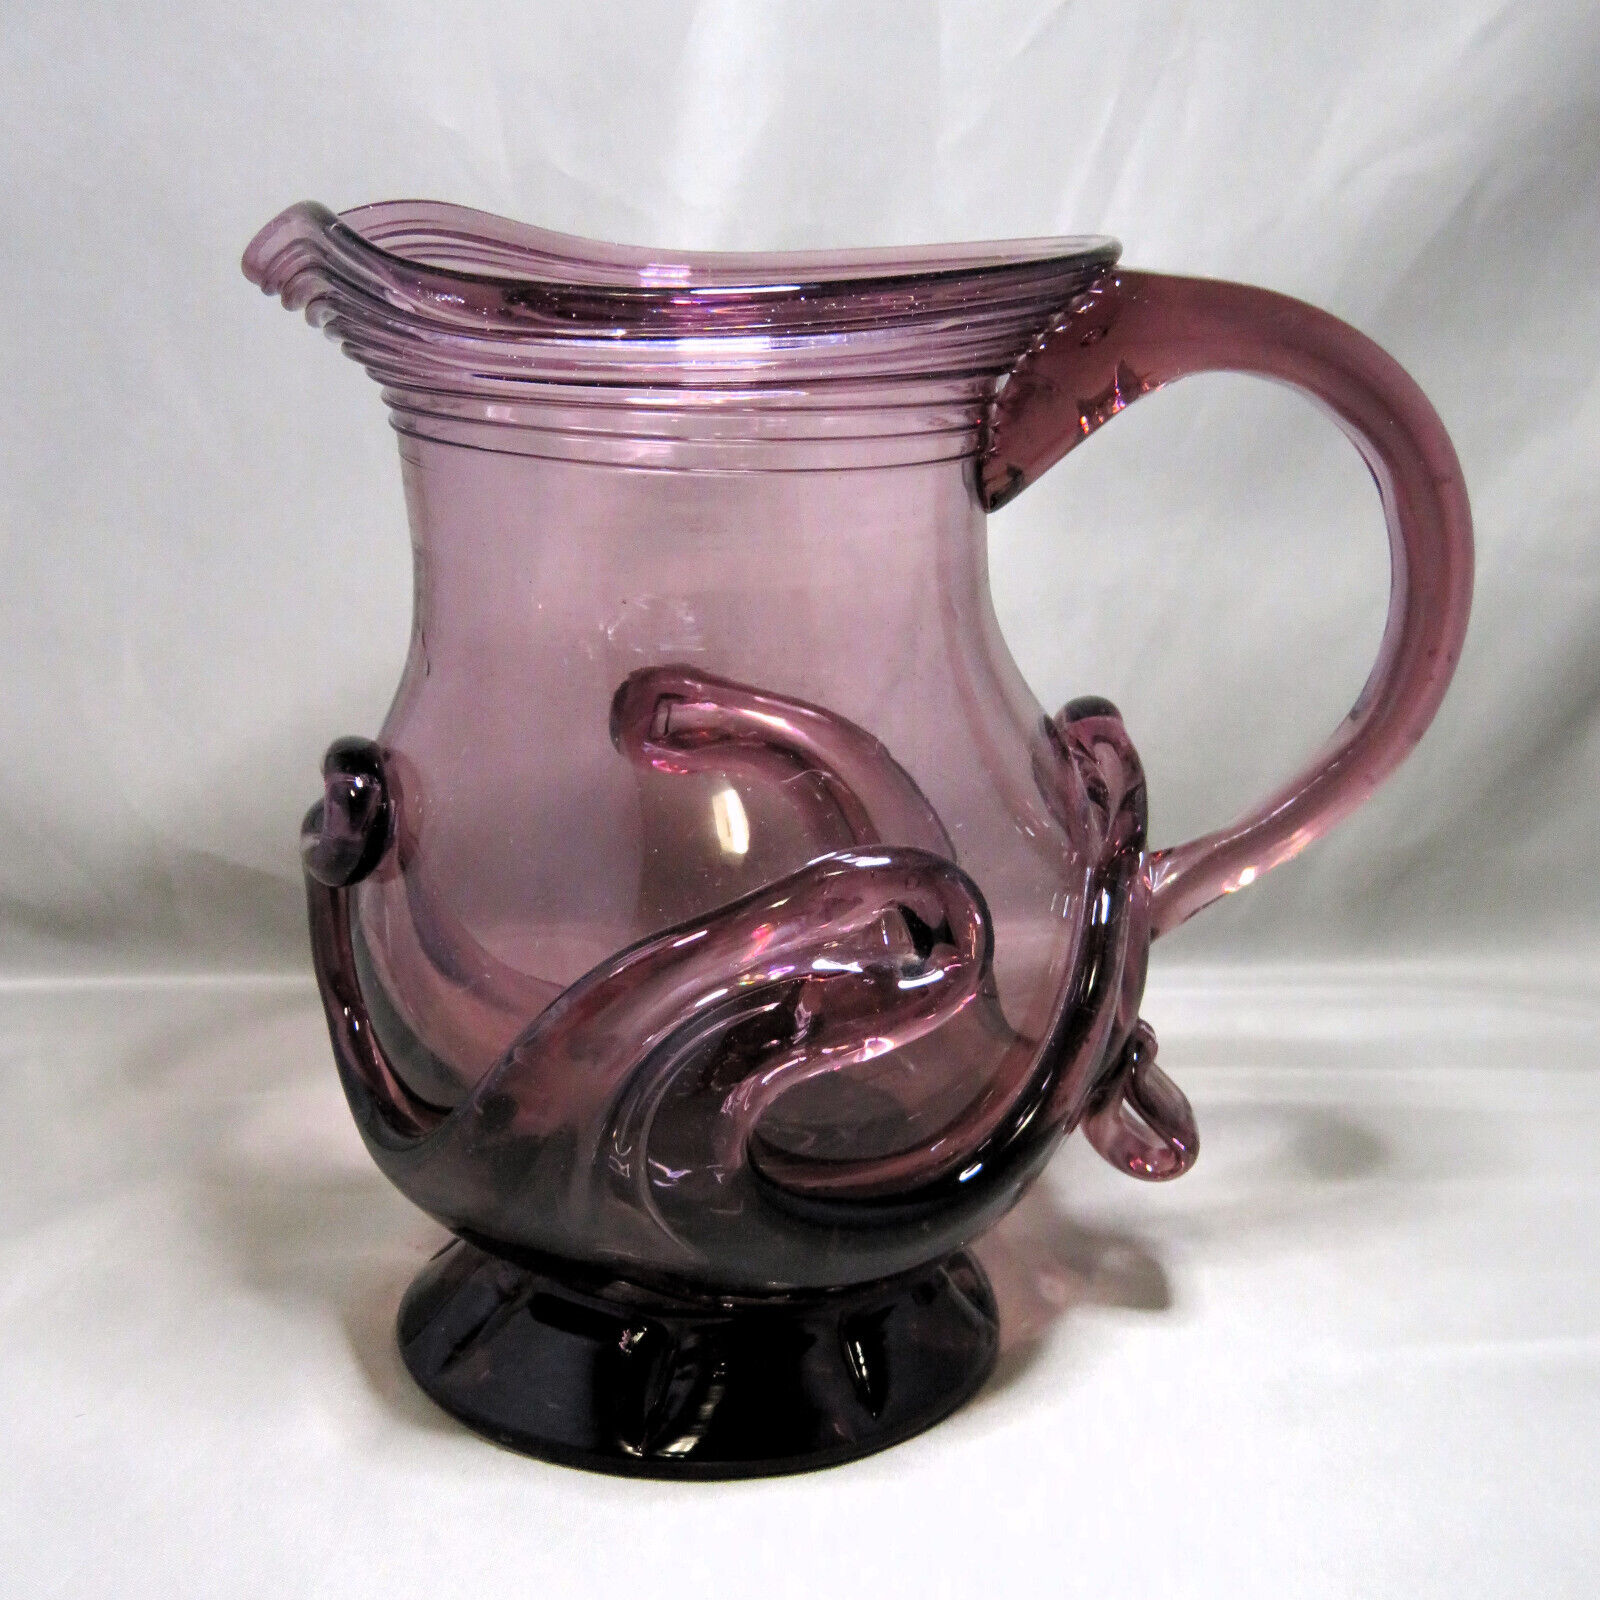 FABULOUS Vintage 1973 MCM AMETHYST Hand Blown Art Glass Lily Pad Pitcher SIGNED